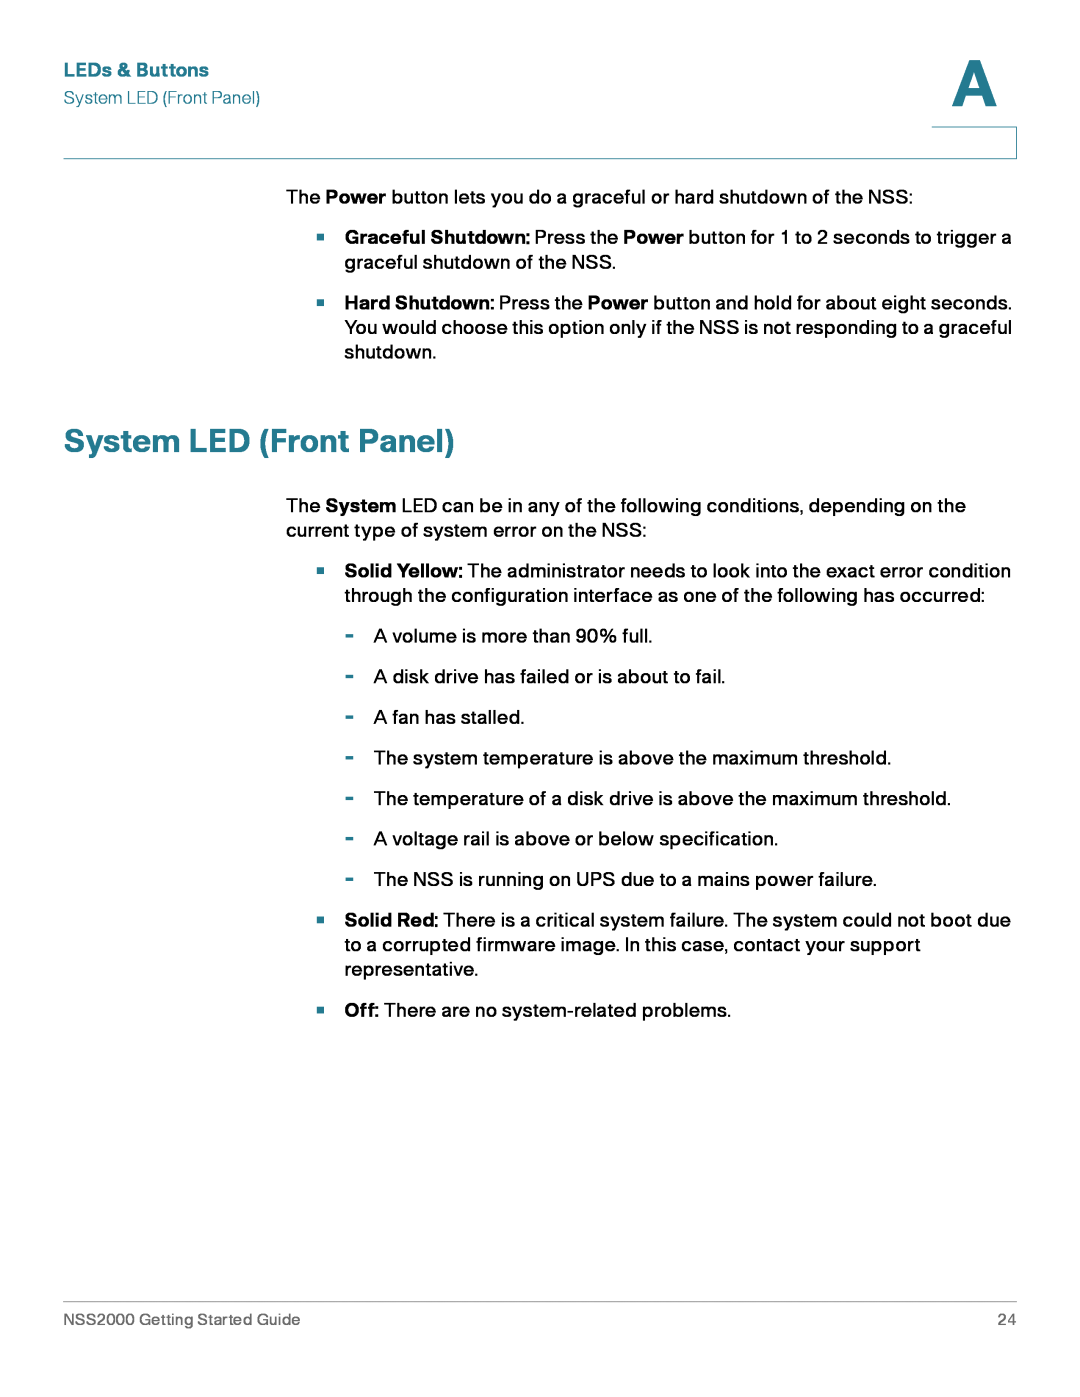 Cisco Systems NSS2000 Series manual System LED Front Panel, LEDs & Buttons 